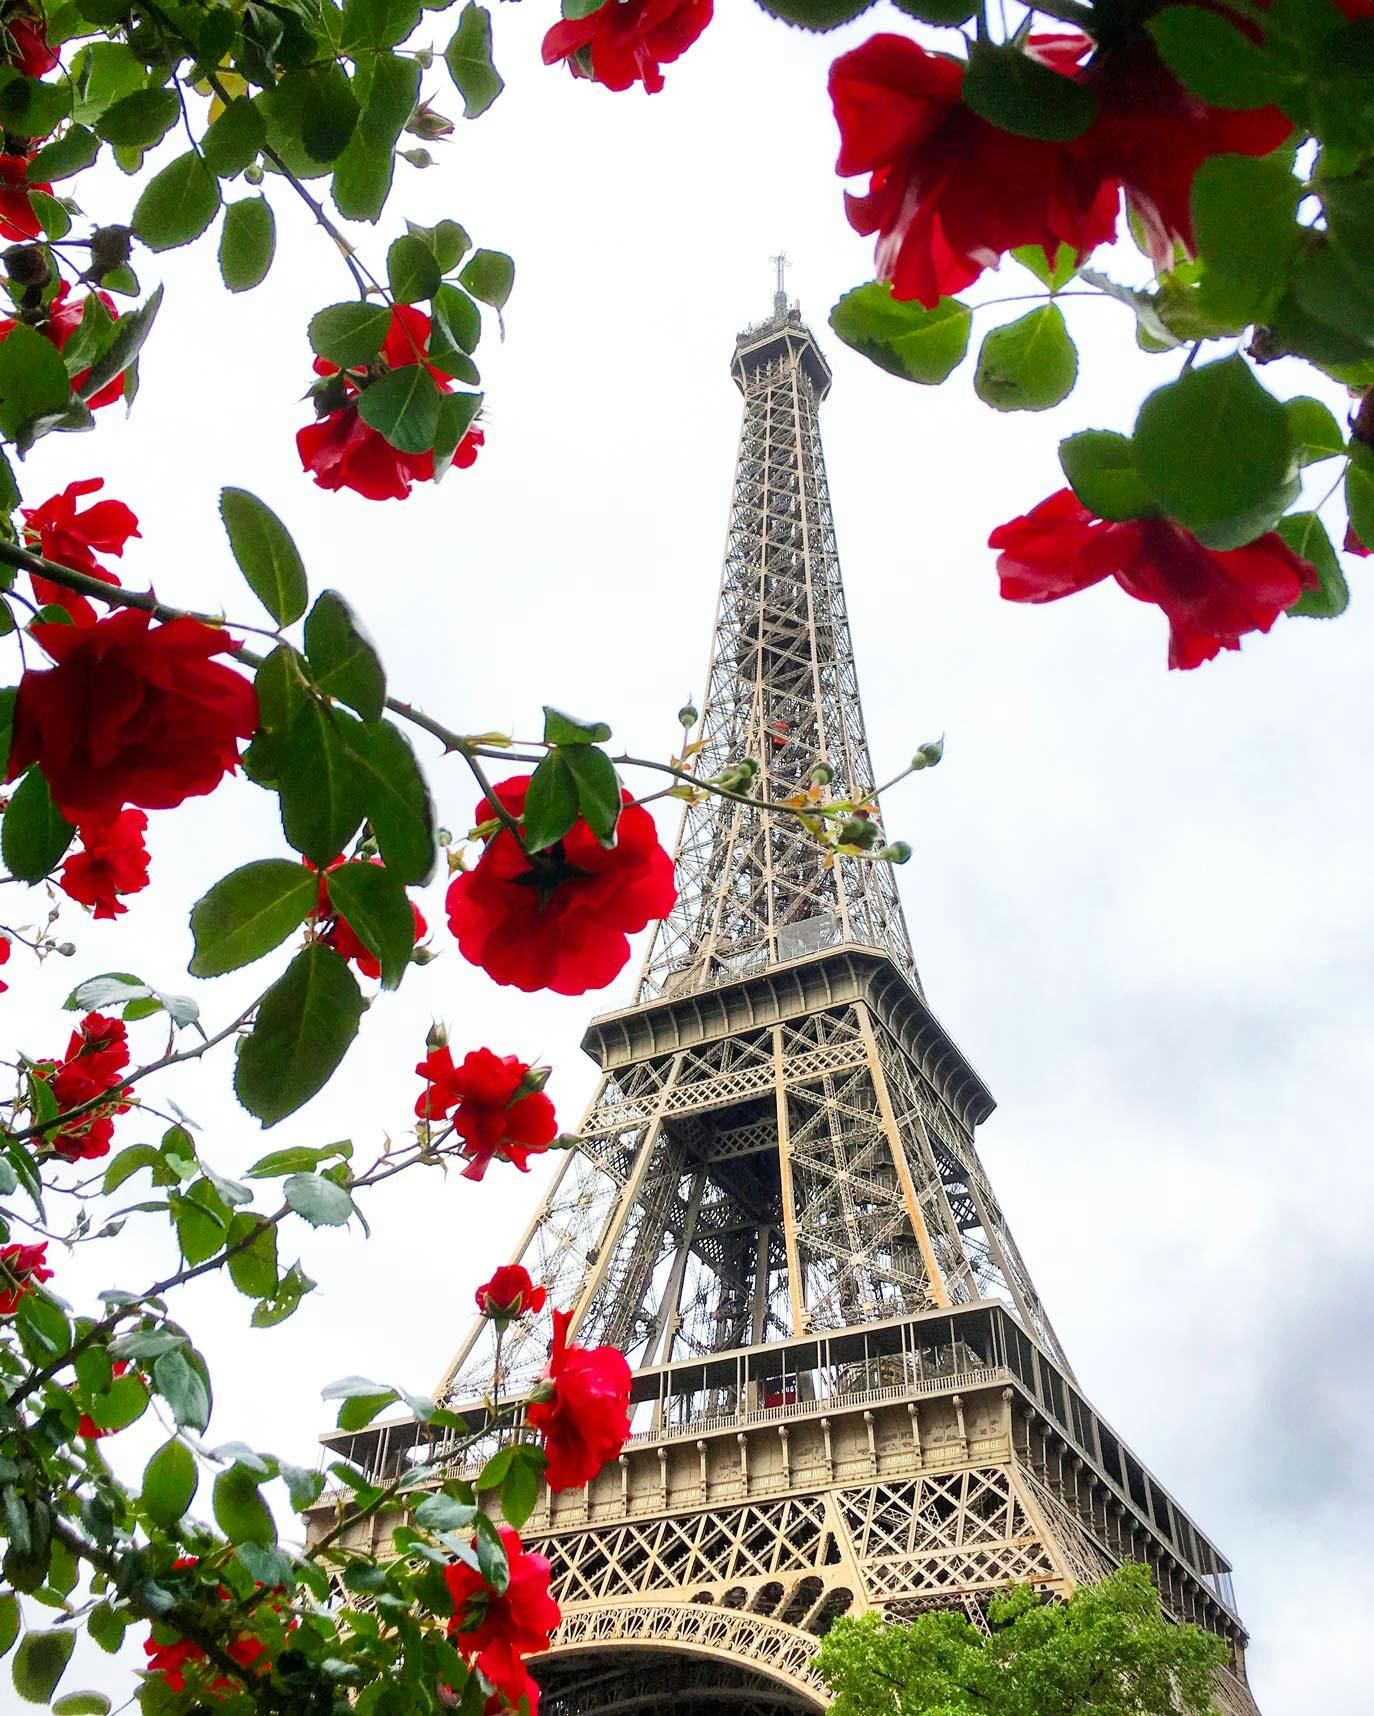 The Eiffel Tower & Red Flowers